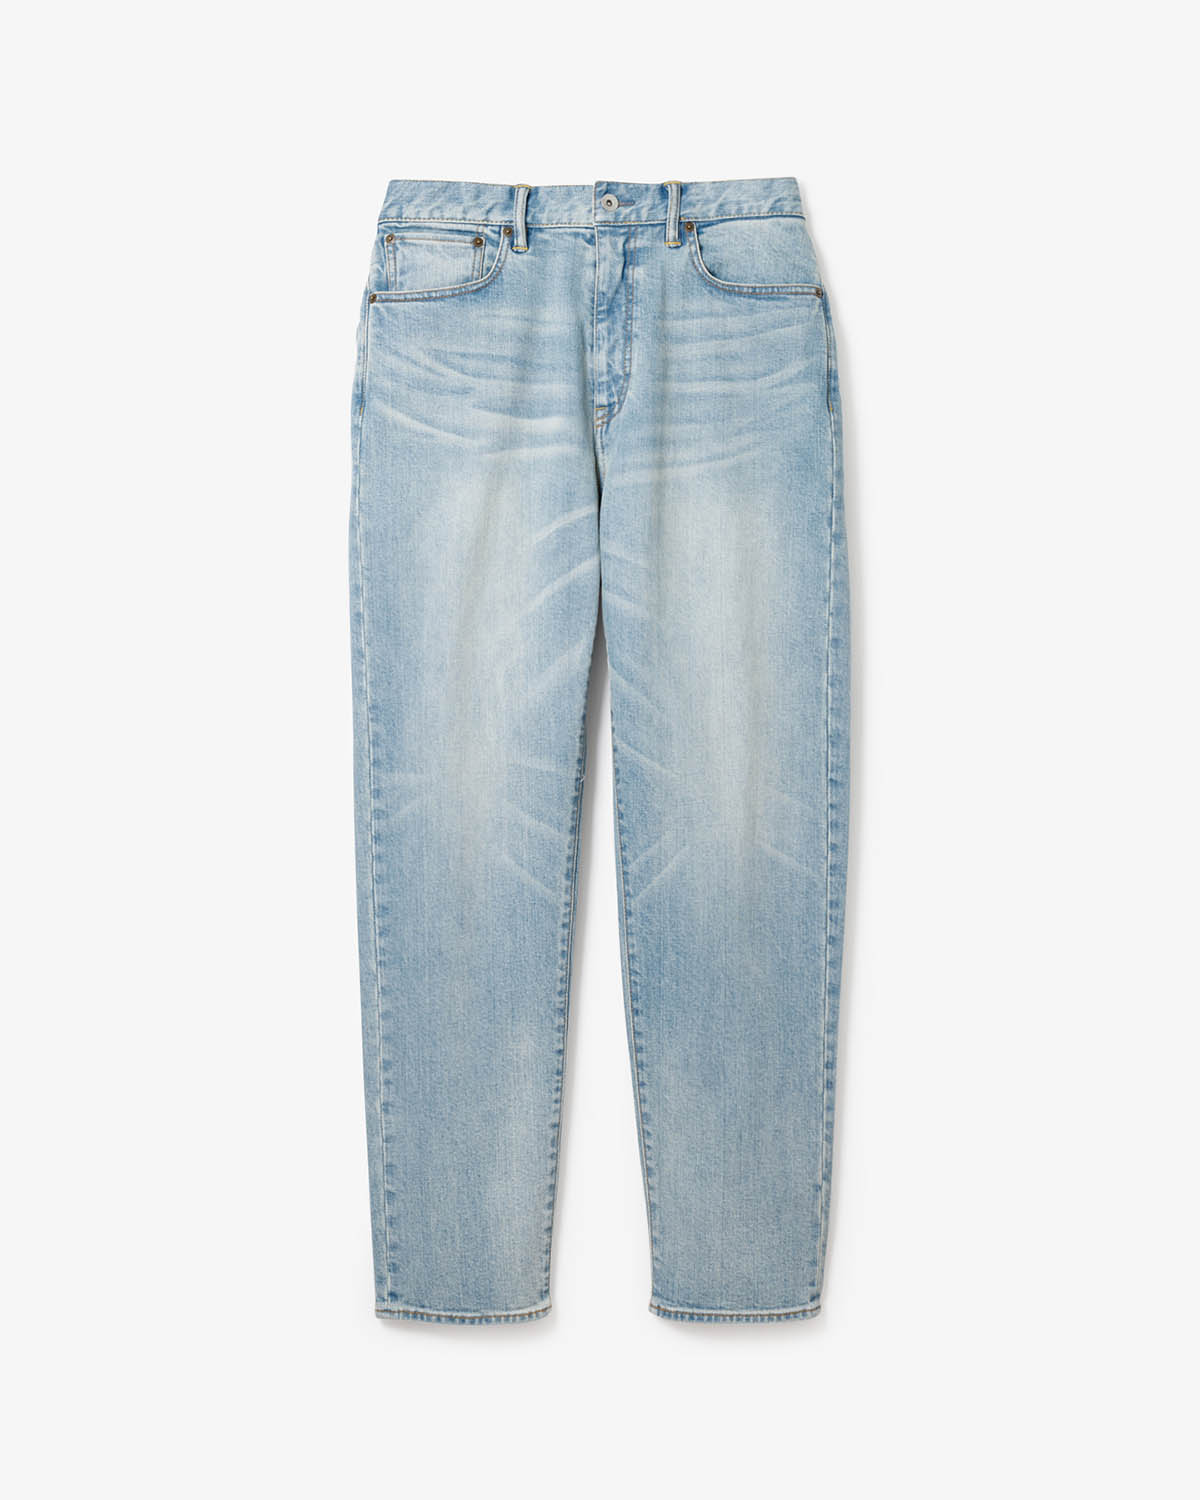 DAMAGED DENIM PANTS - STRETCH EASY FIT TAPERED